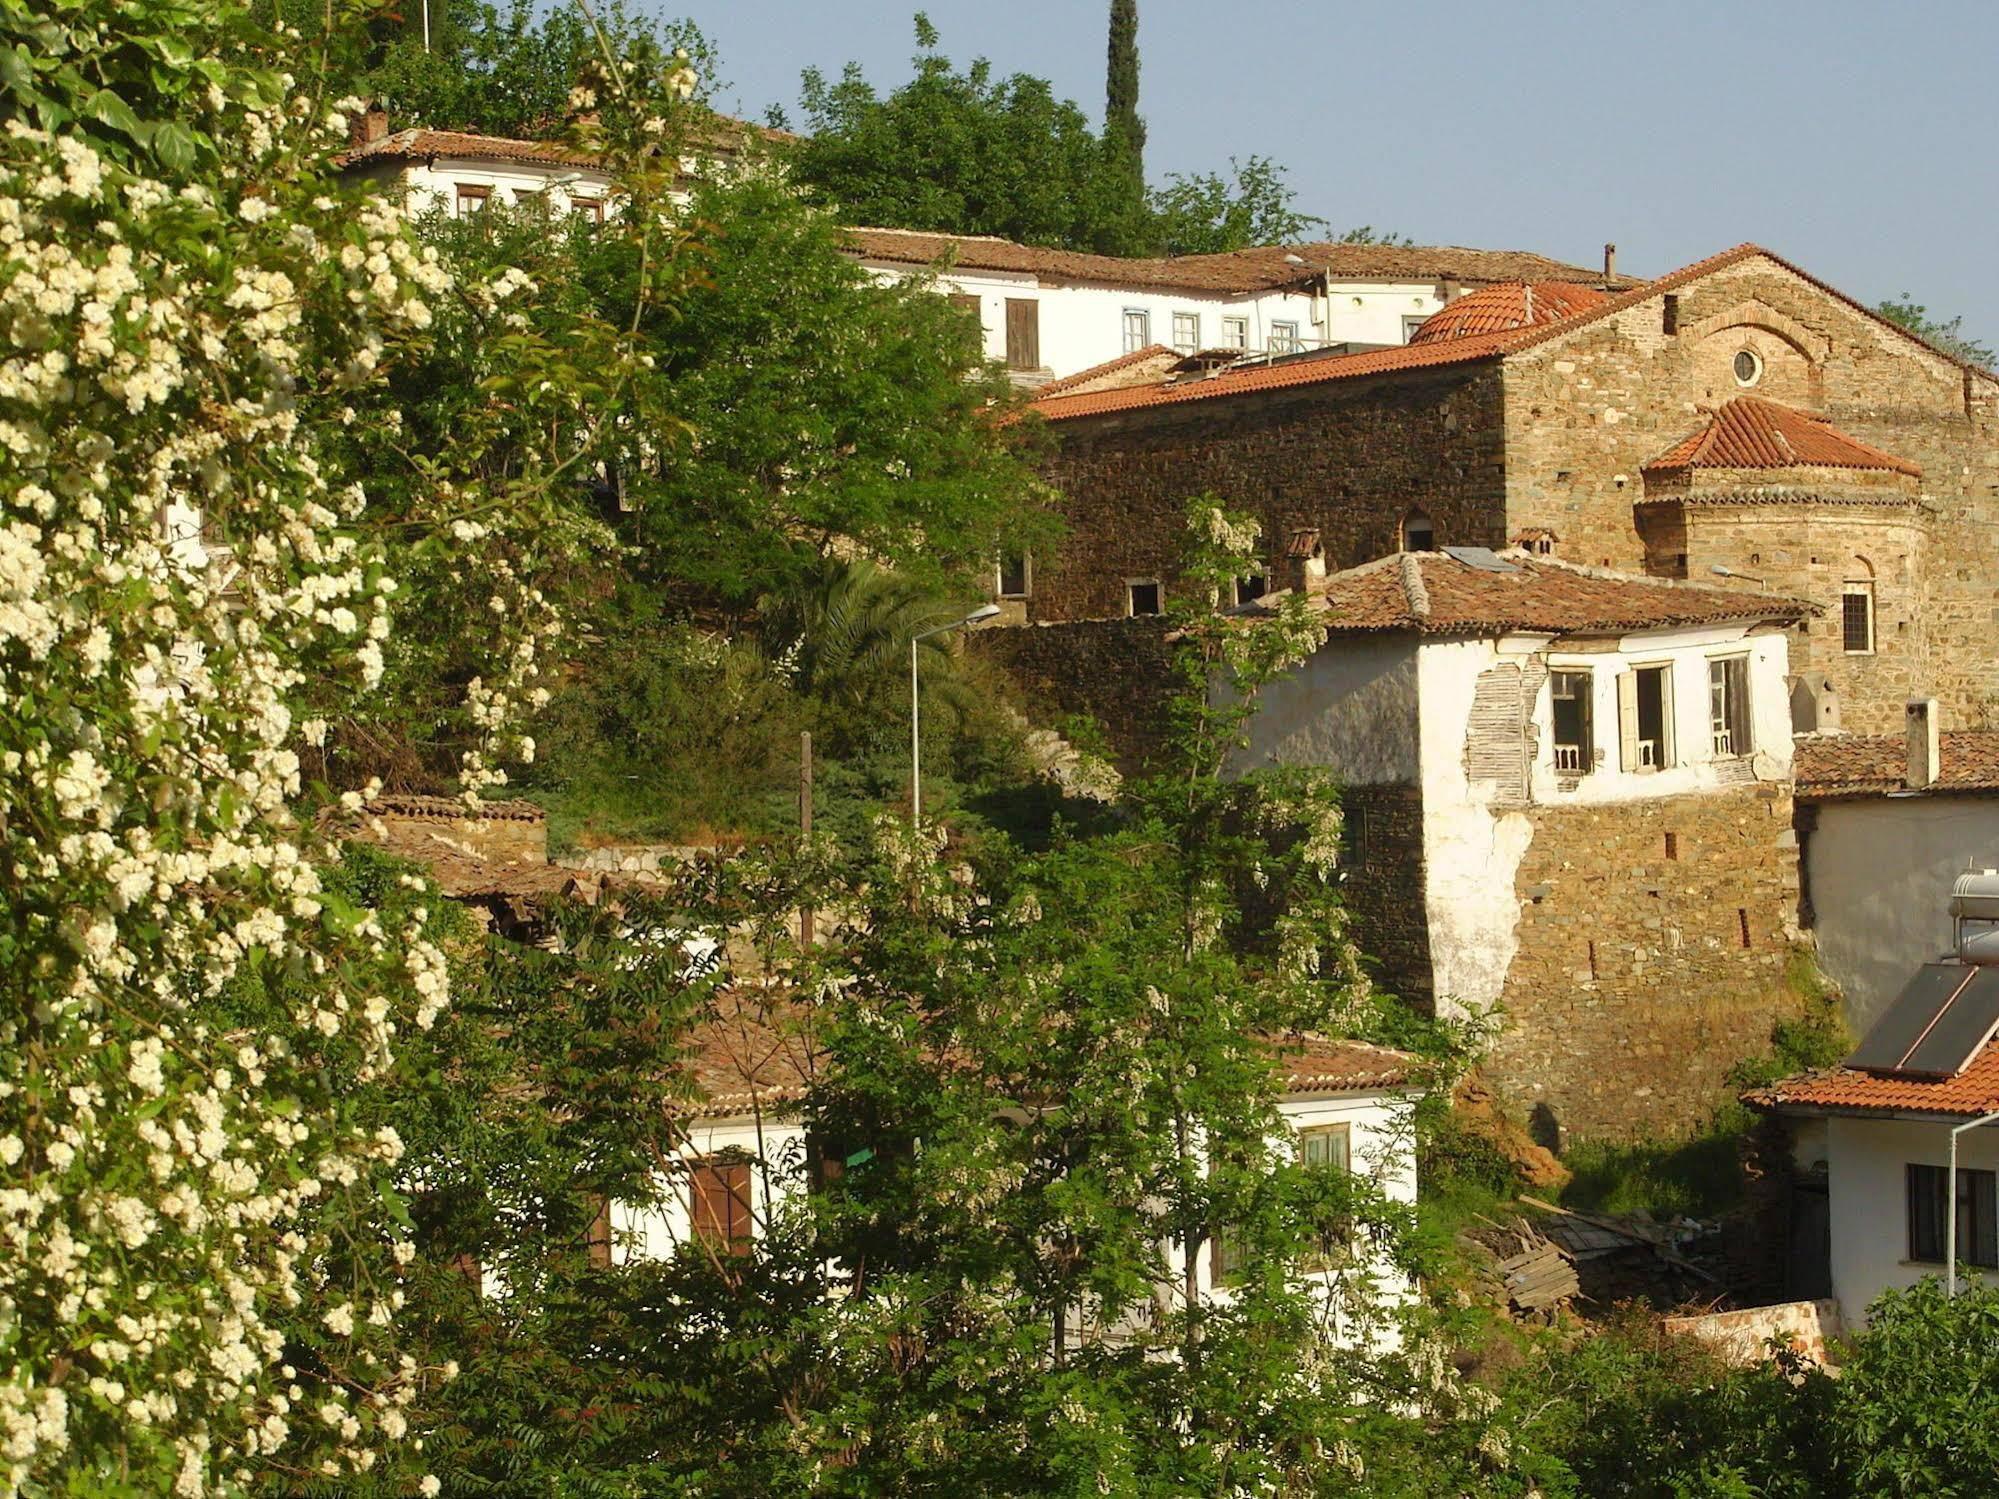 Terrace Houses Sirince - Fig, Olive and Grapevine